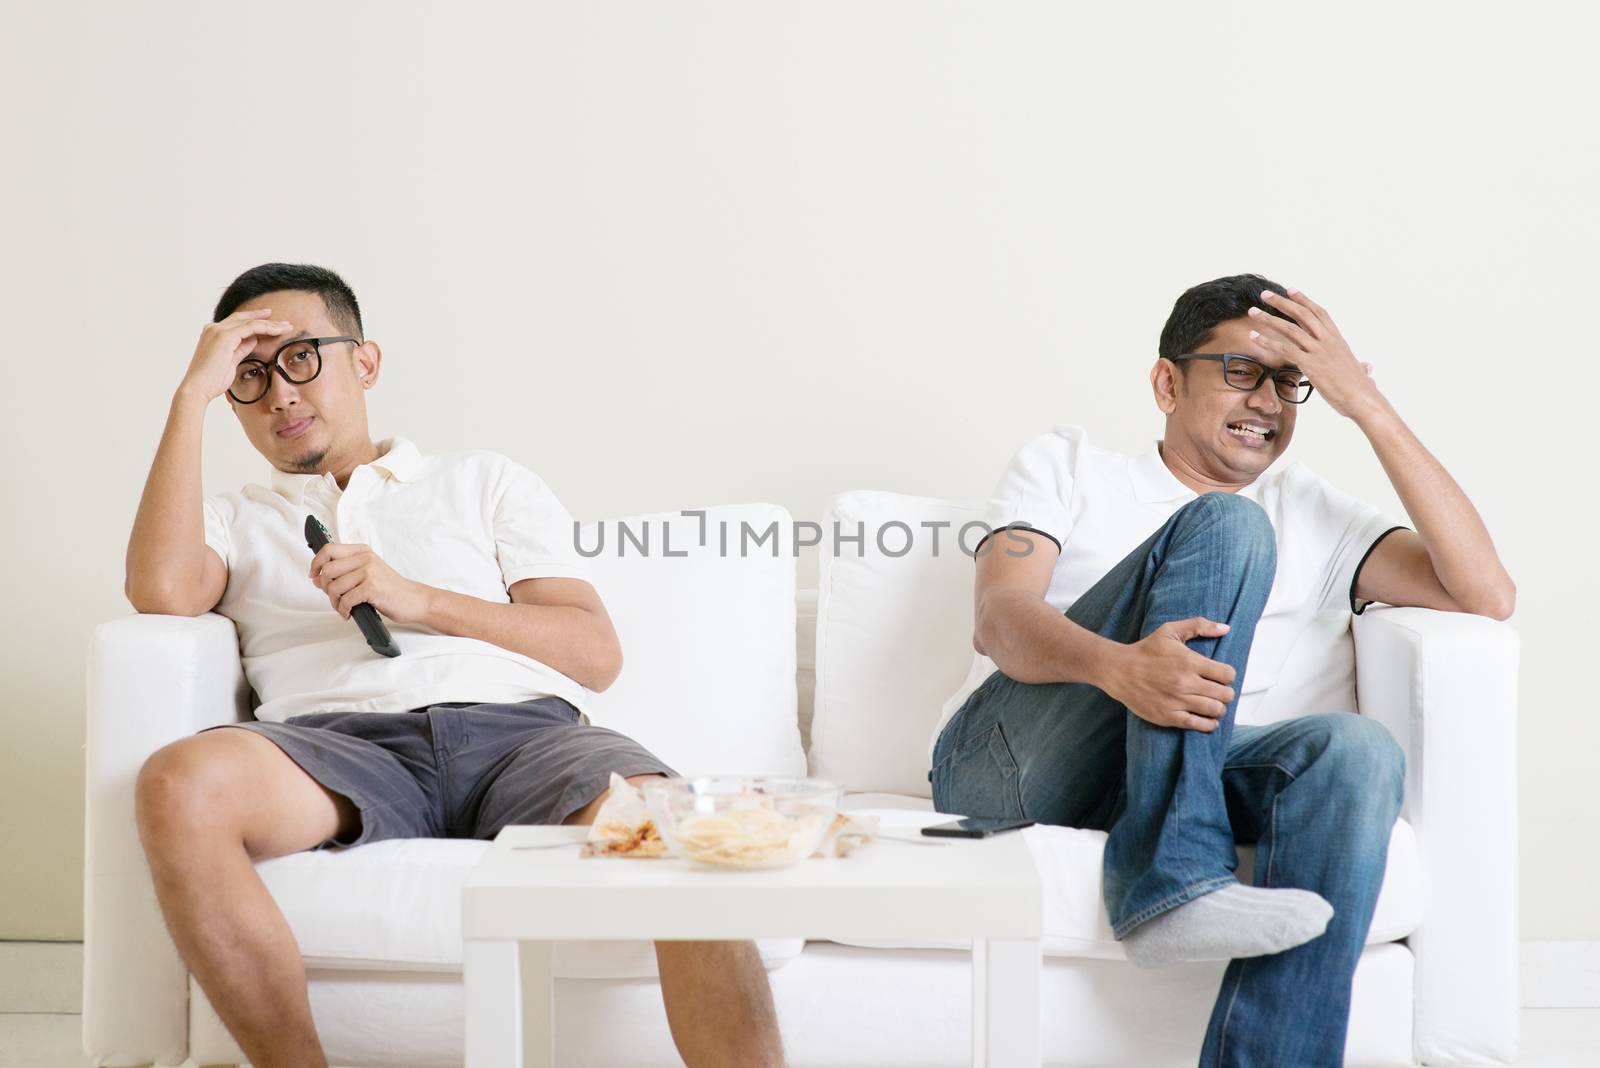 Men sitting on couch watching football match on television together at home.